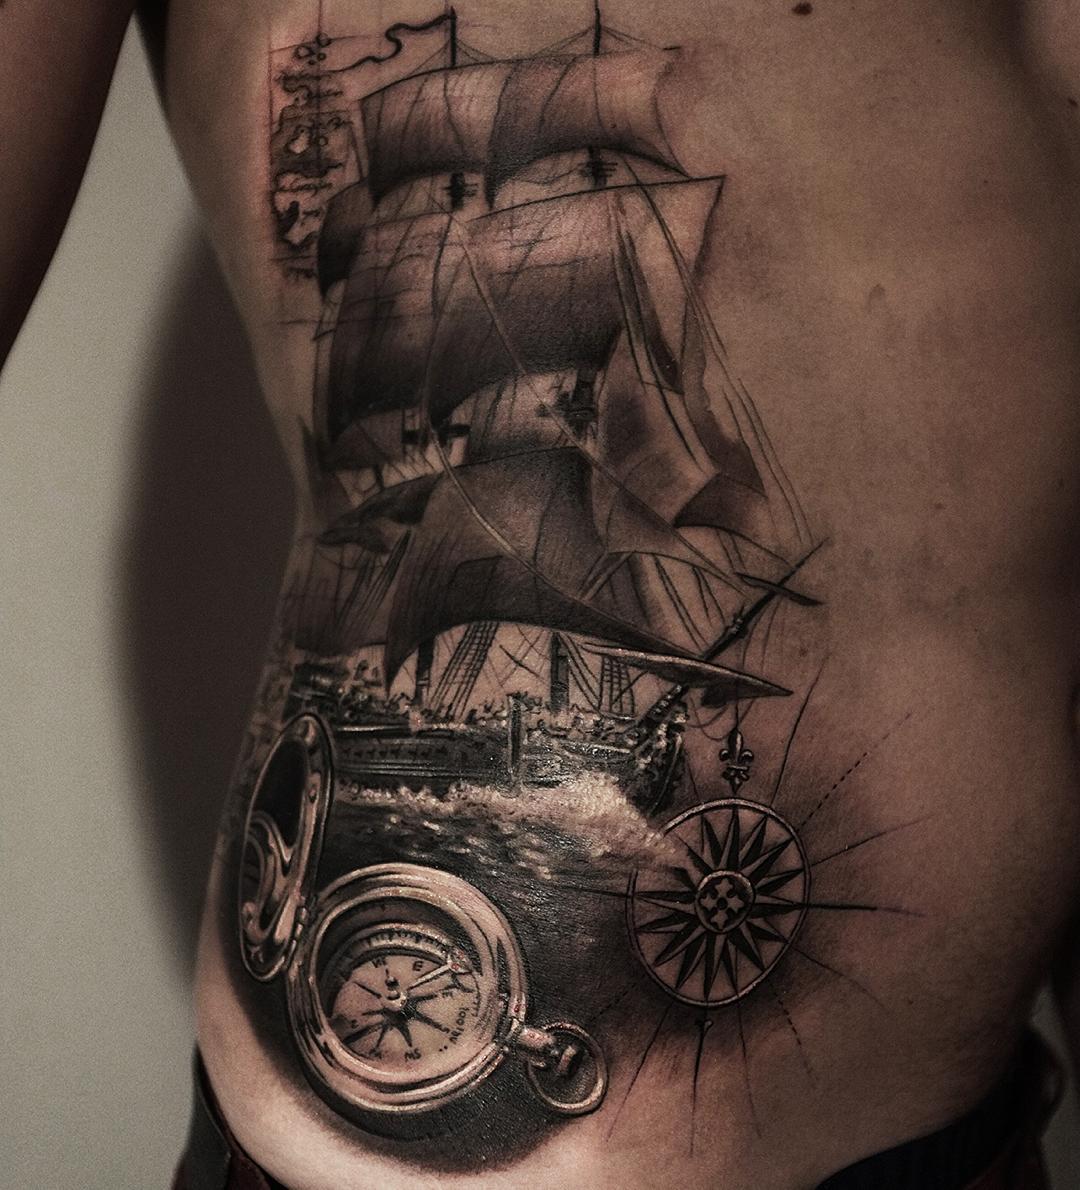 great nautical tattoo plot -sailing ship and all ather nautical elements here are awesome